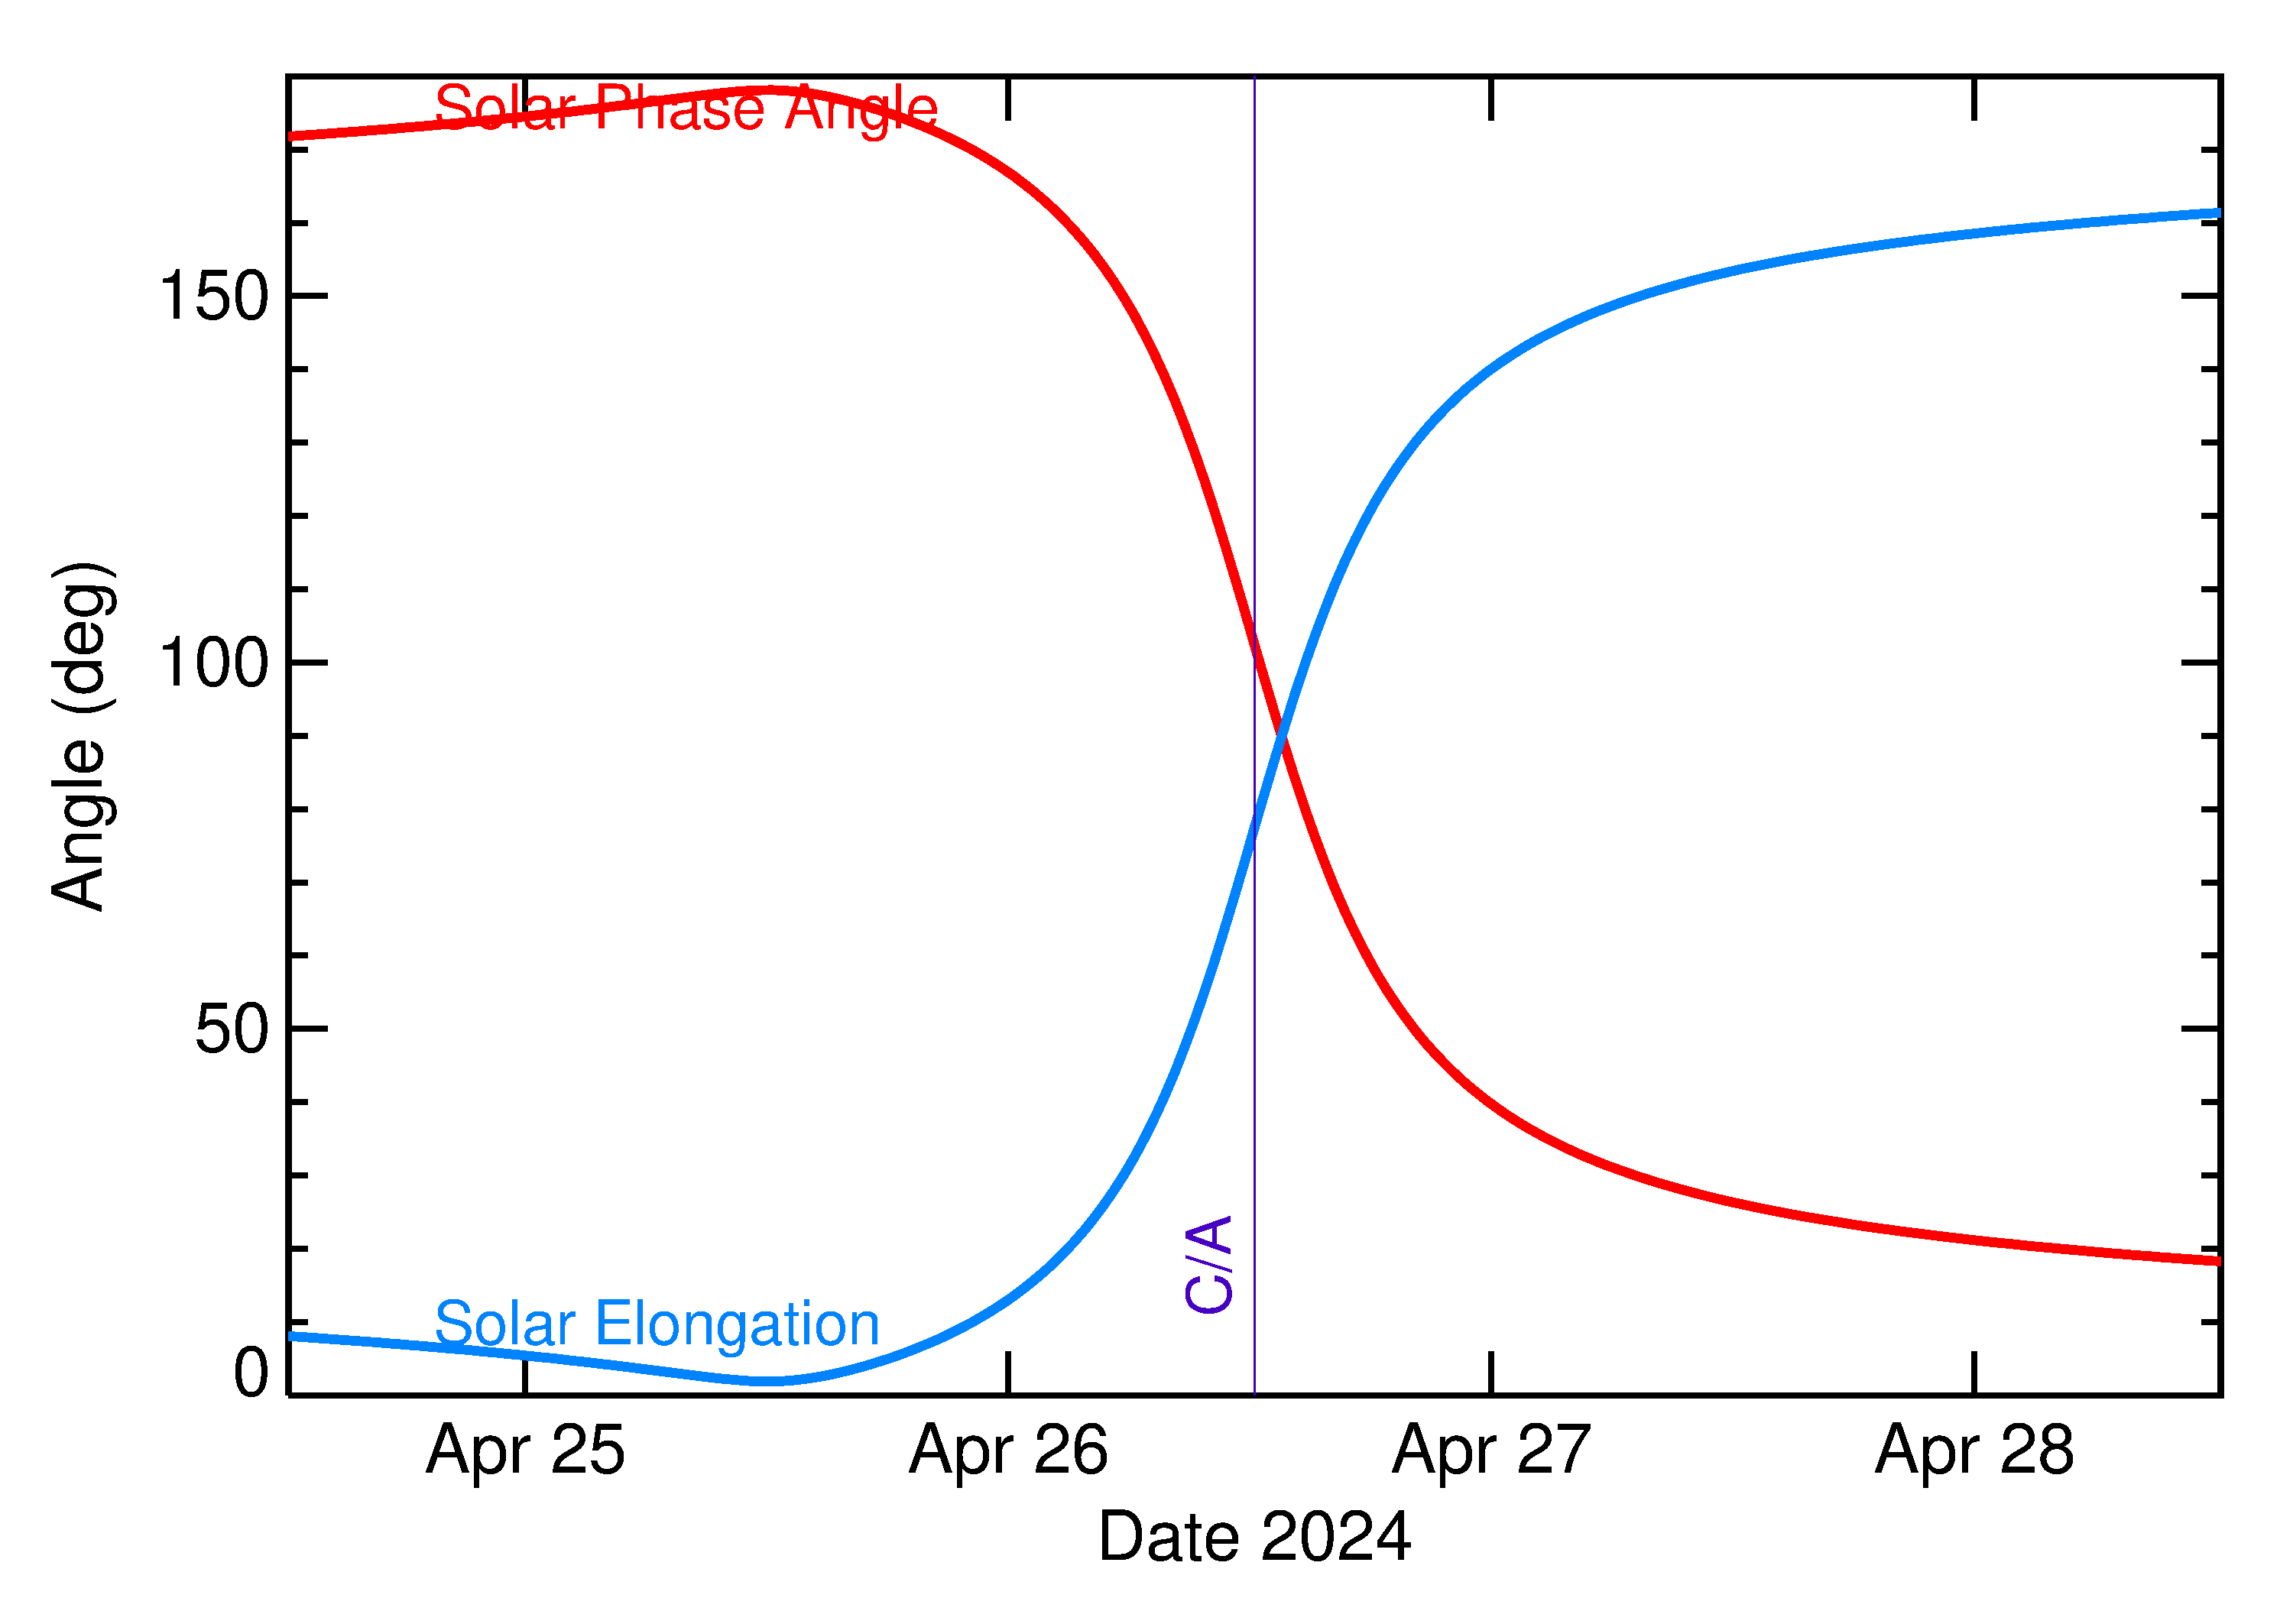 Solar Elongation and Solar Phase Angle of 2024 HT1 in the days around closest approach